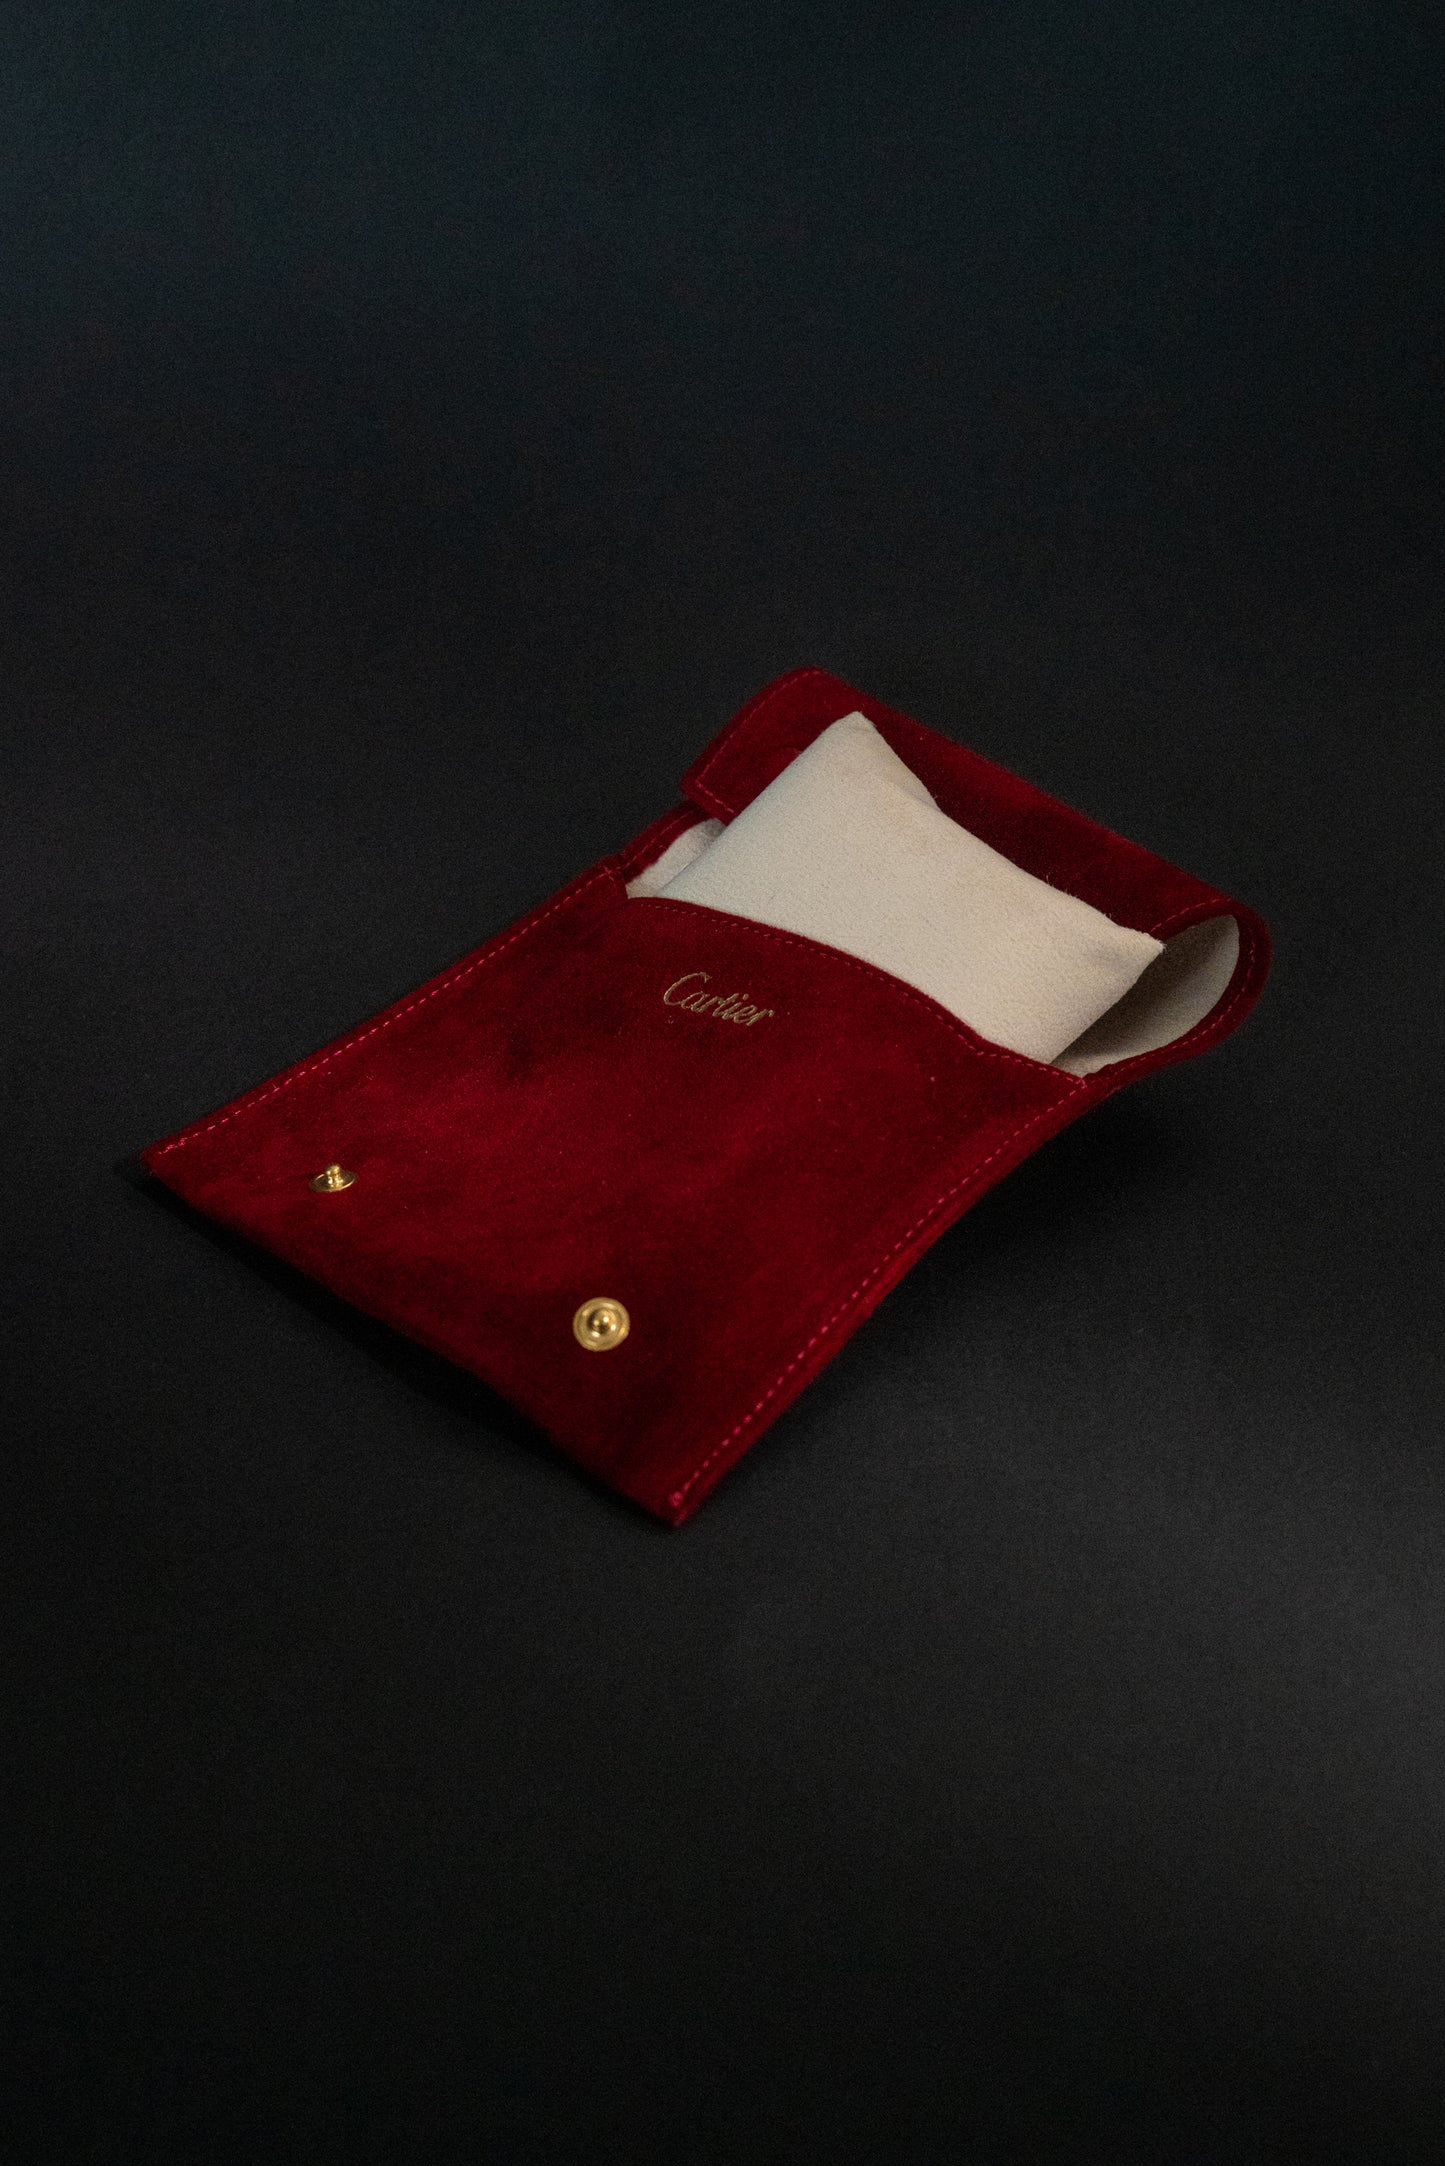 Cartier Travel Pouch made of fabric